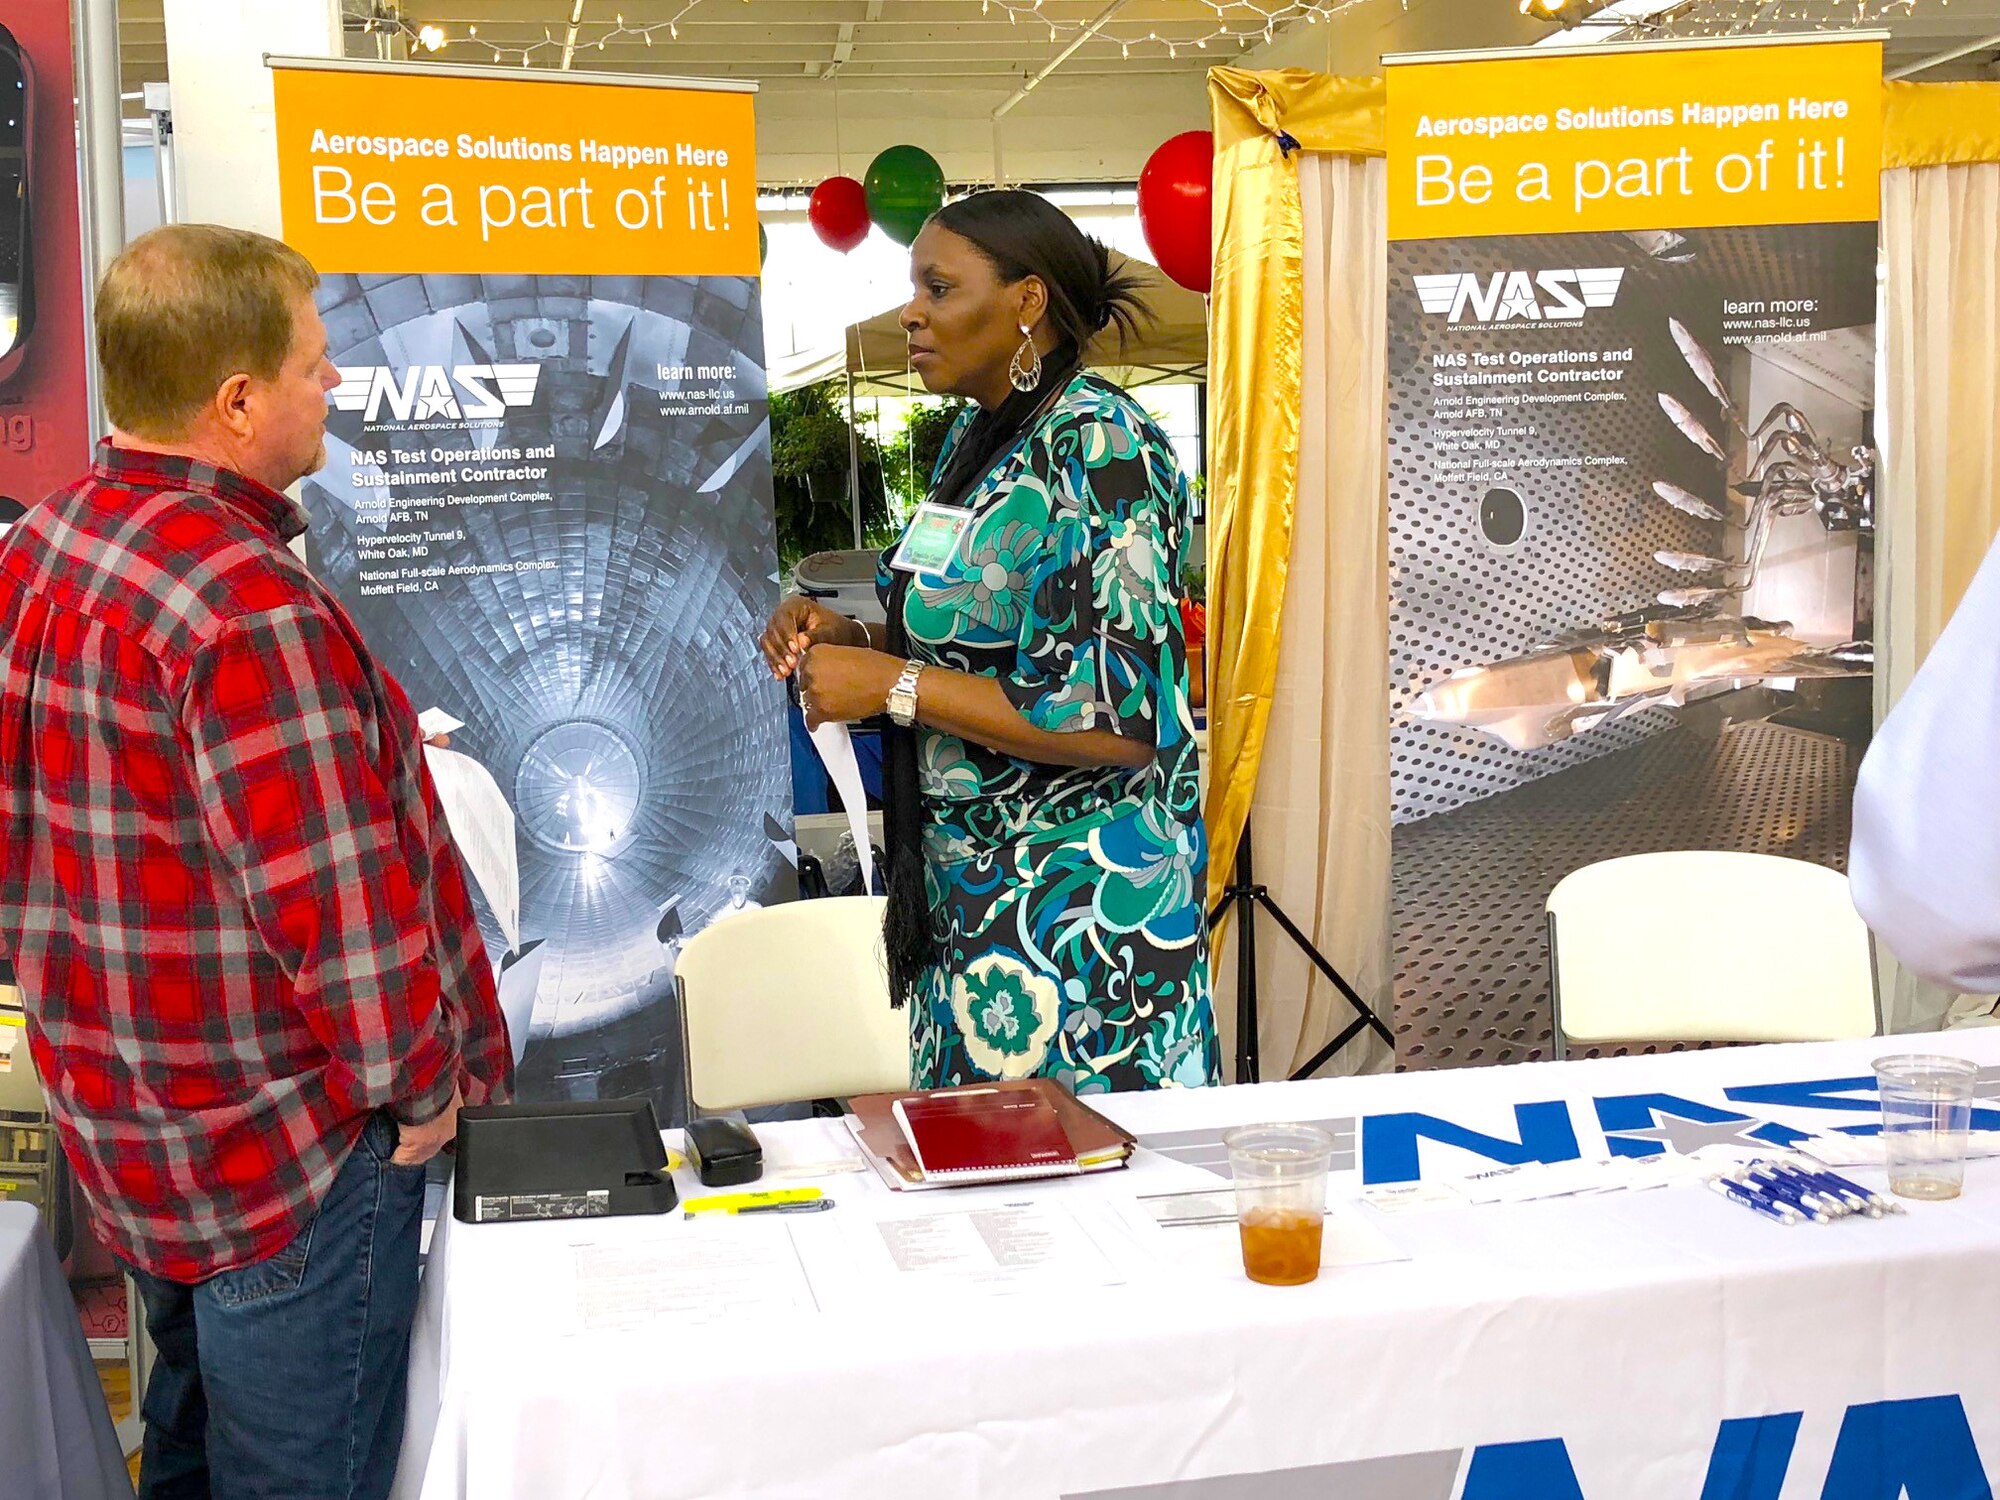 Cindy Dixon, right, speaks with an attendee of the Franklin County Chamber of Commerce Business Expo April 5 at the Monterey Station in Cowan. Dixon is an AEDC acquisition professional at Arnold Air Force Base with the Test Operations and Support contractor. She provides instruction to local and regional businesses on the processes of doing business with the Base. (Courtesy NAS photo by Bob Pullen)